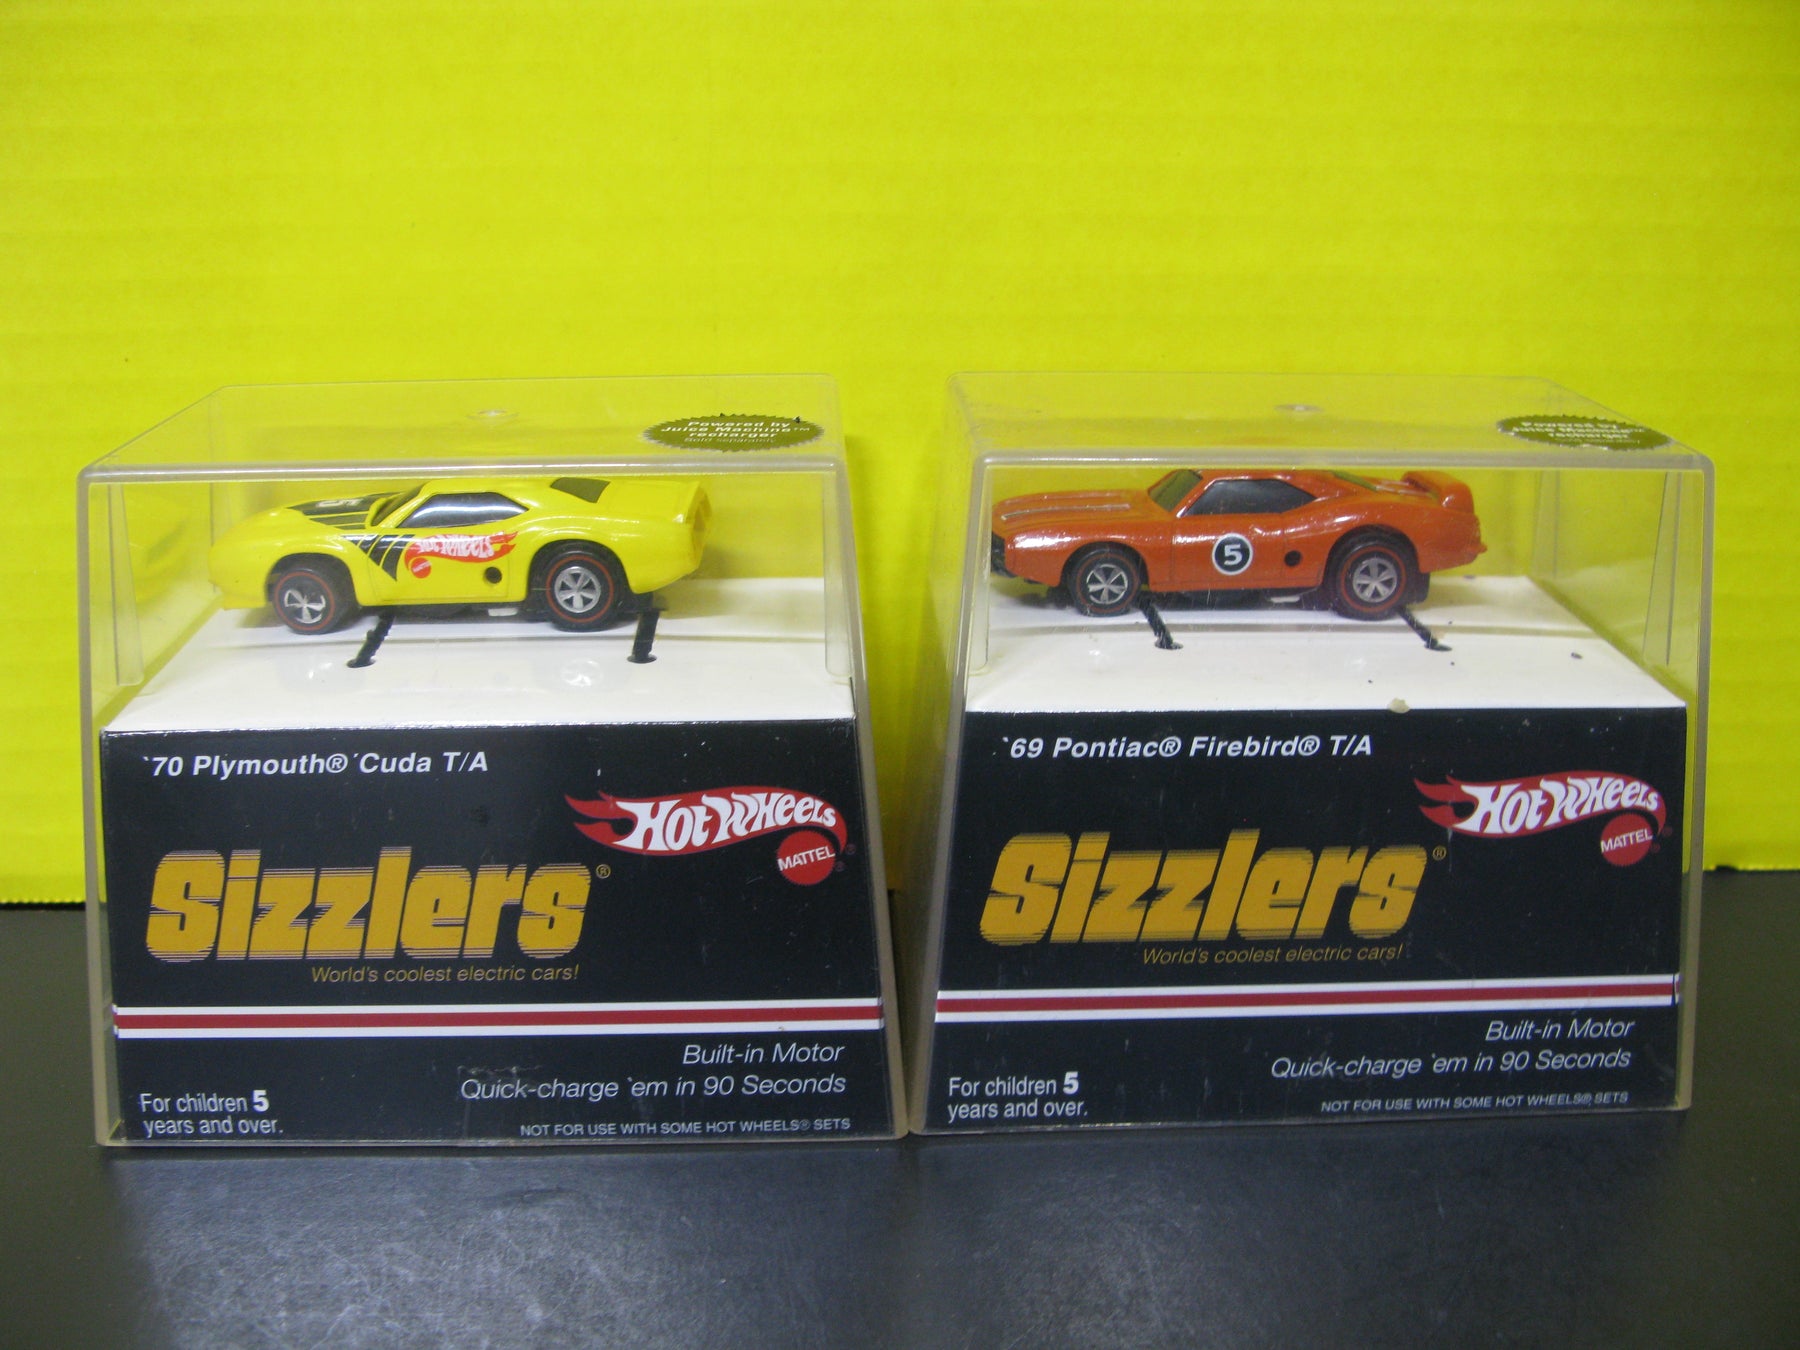 2 Hot Wheels Sizzlers